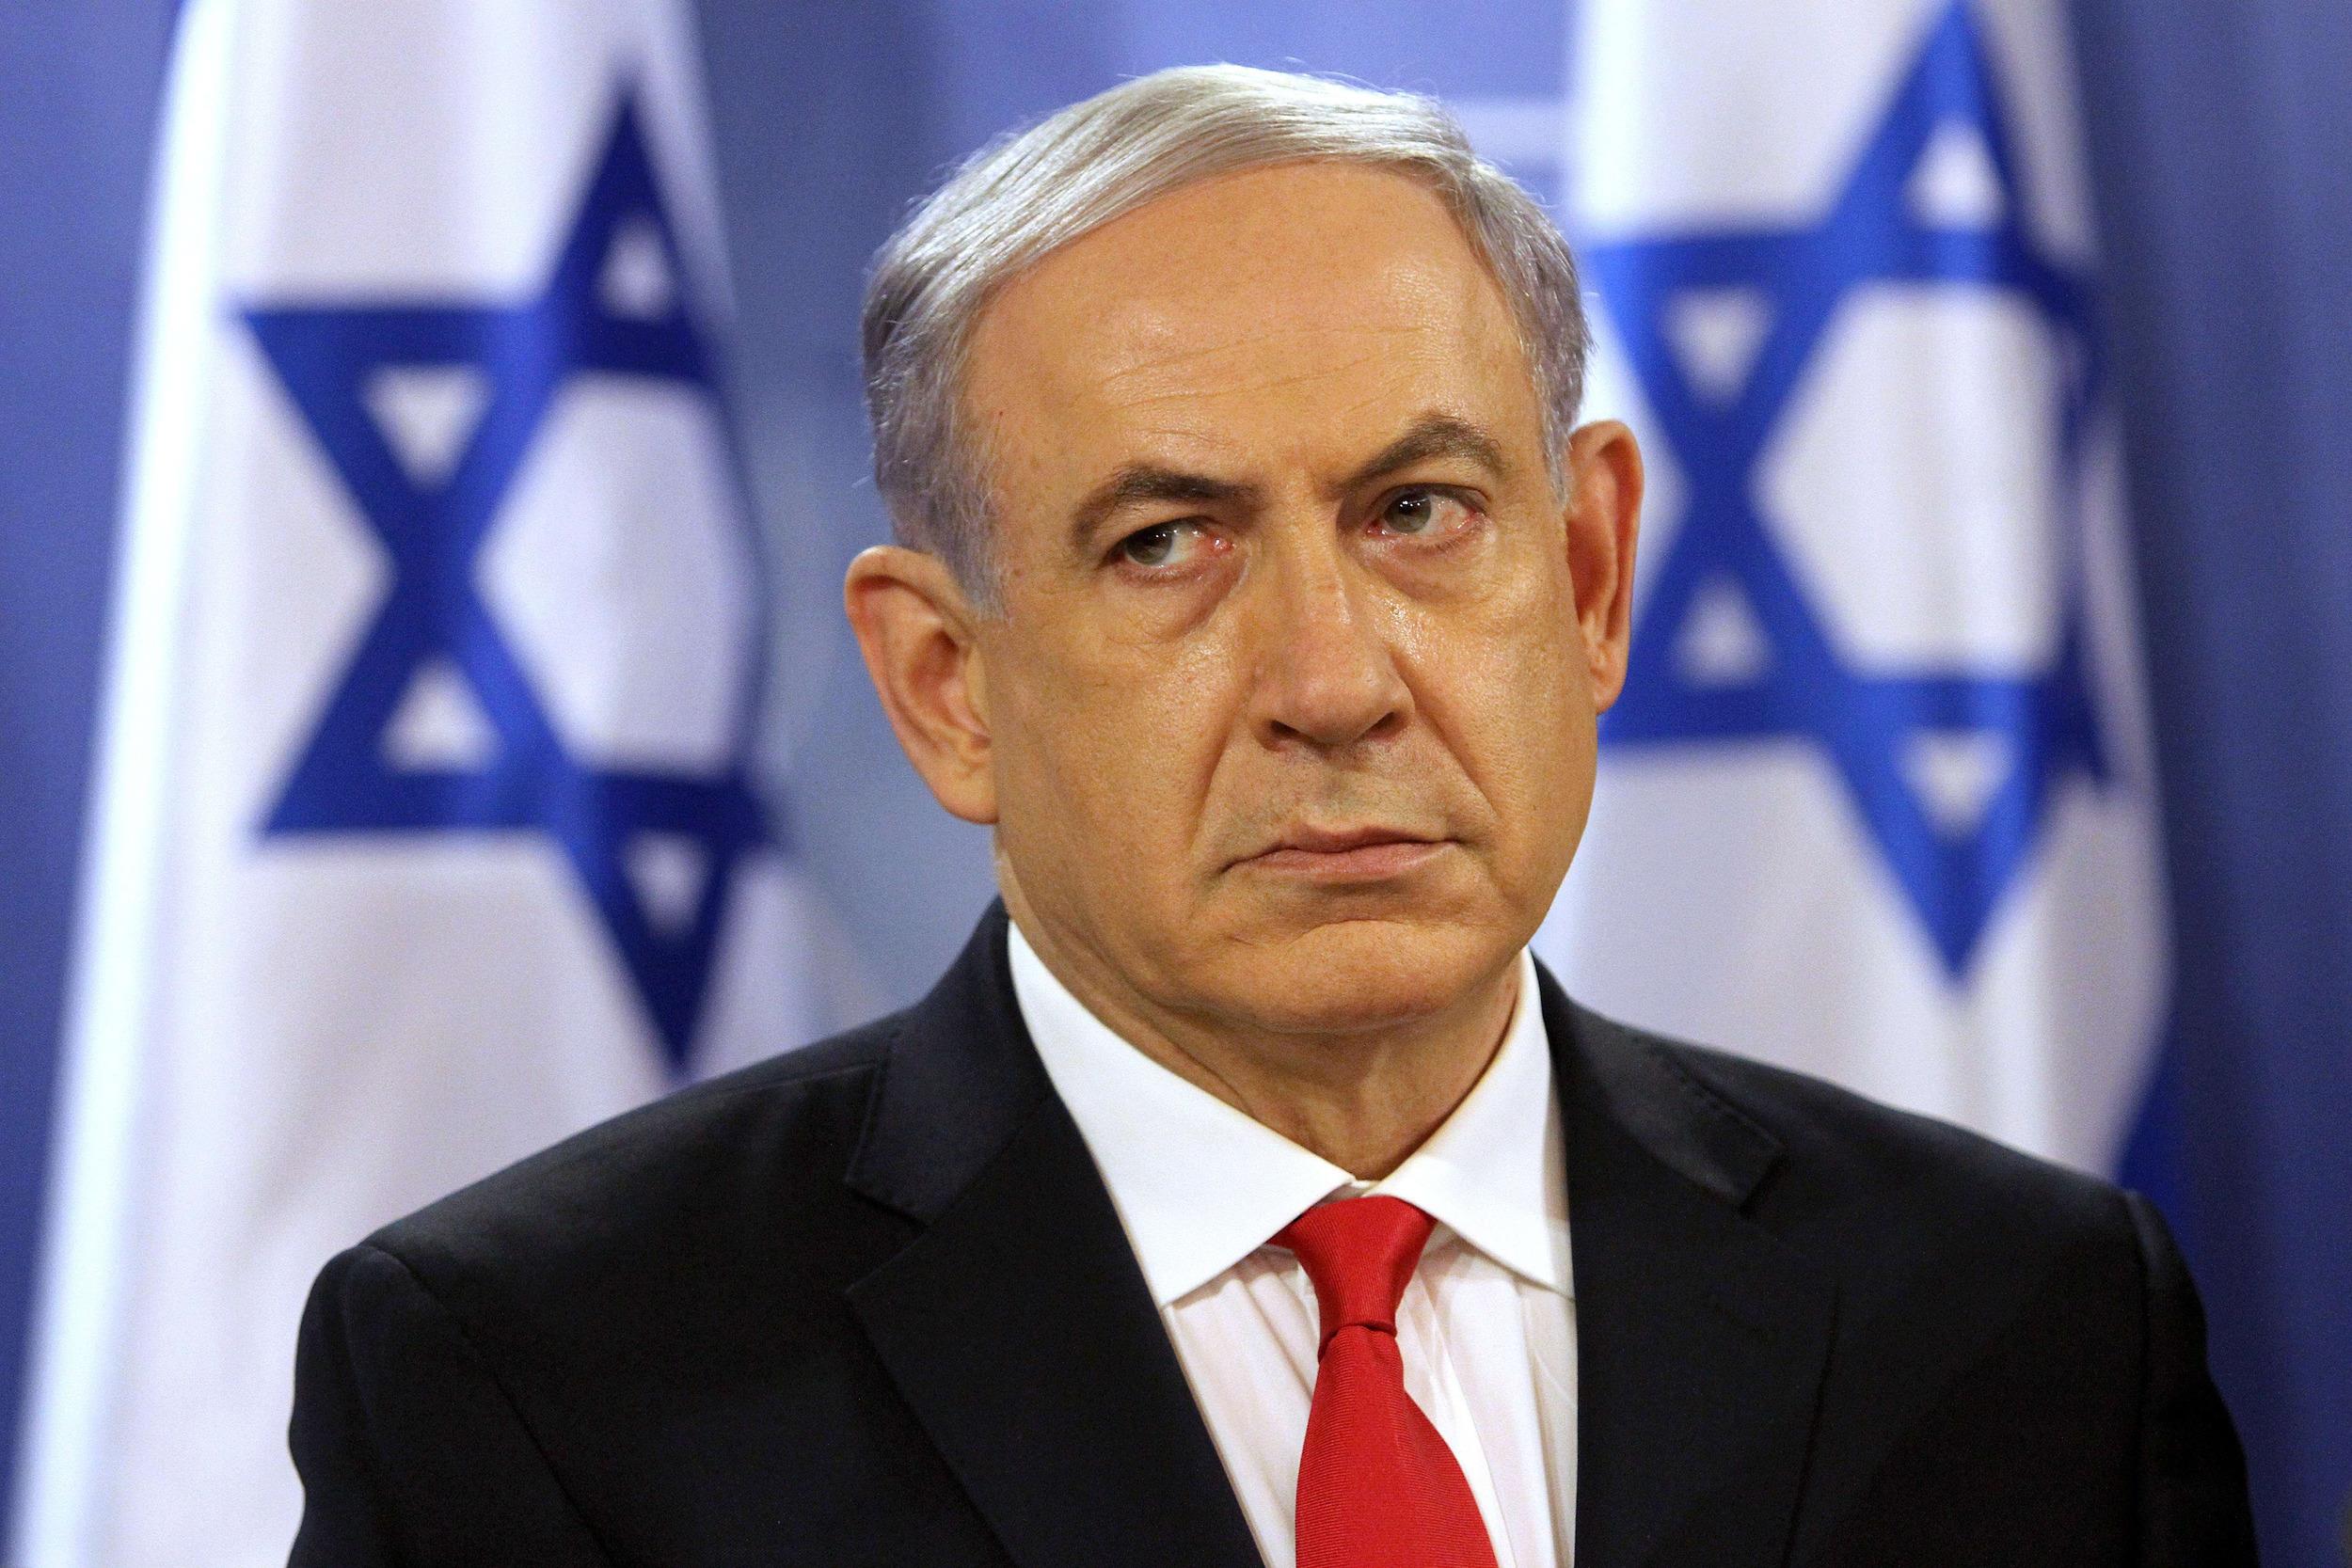 Former Top Aide Agrees to Testify Against Israel’s Netanyahu